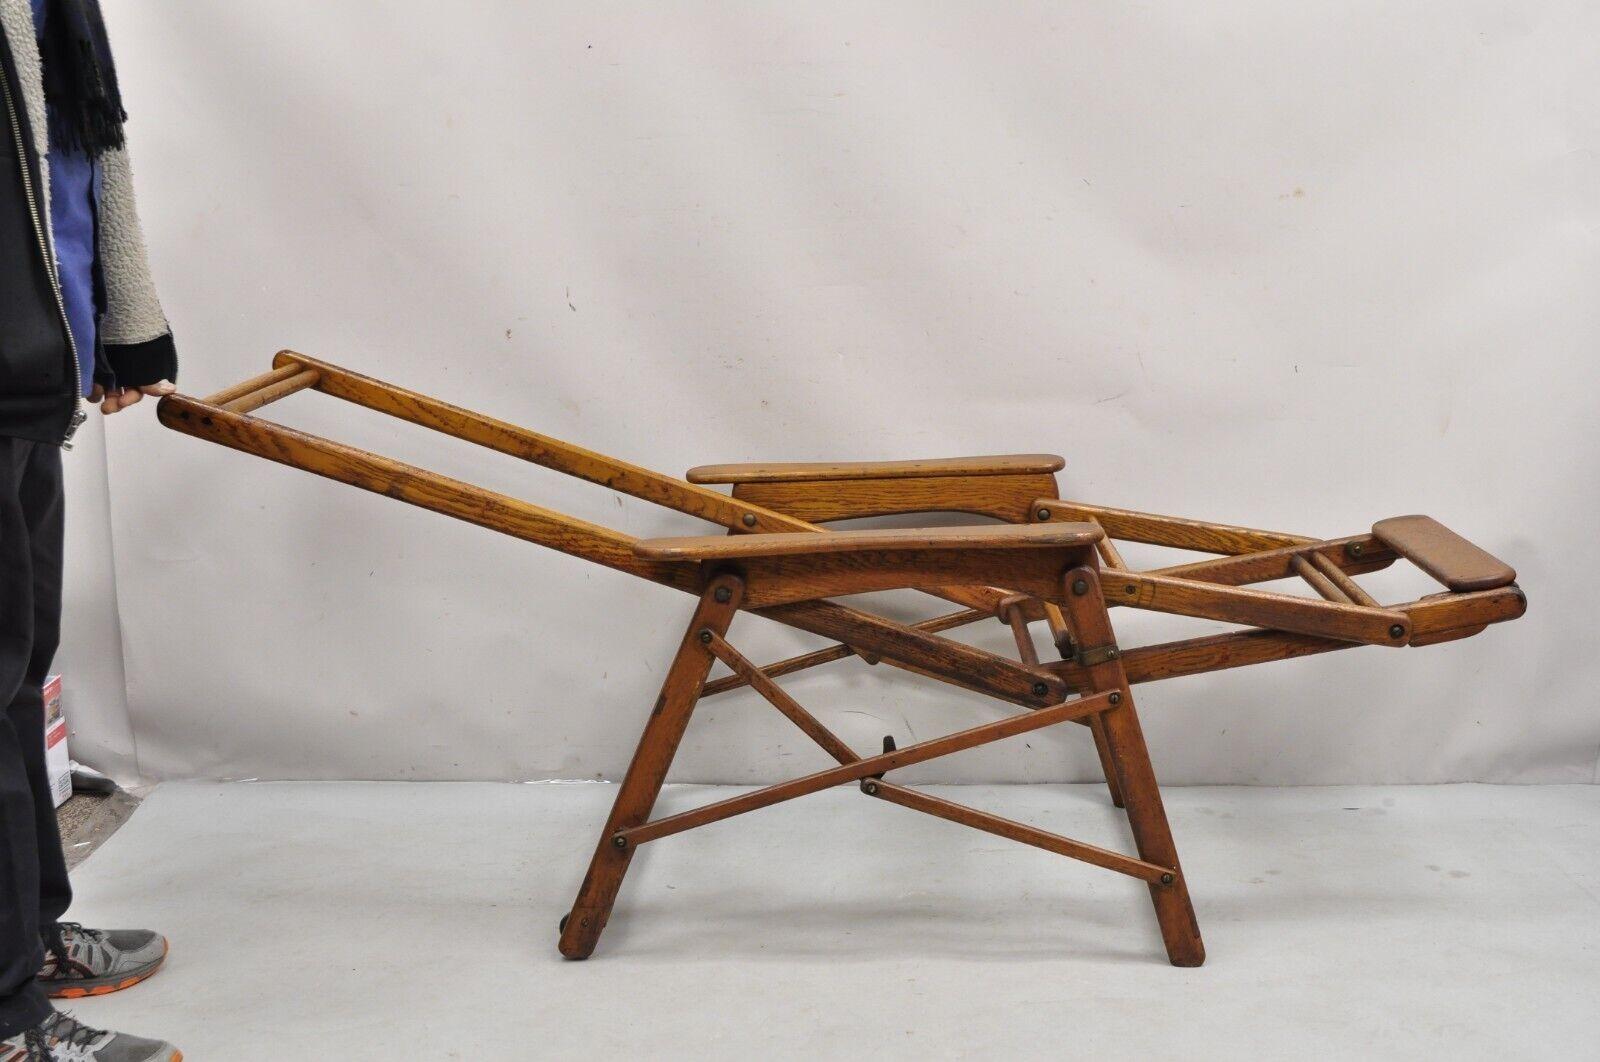 Antique Art Deco Folding Oak Wood Steamer Ship Reclining Deck Chair by Lloyd's In Good Condition For Sale In Philadelphia, PA